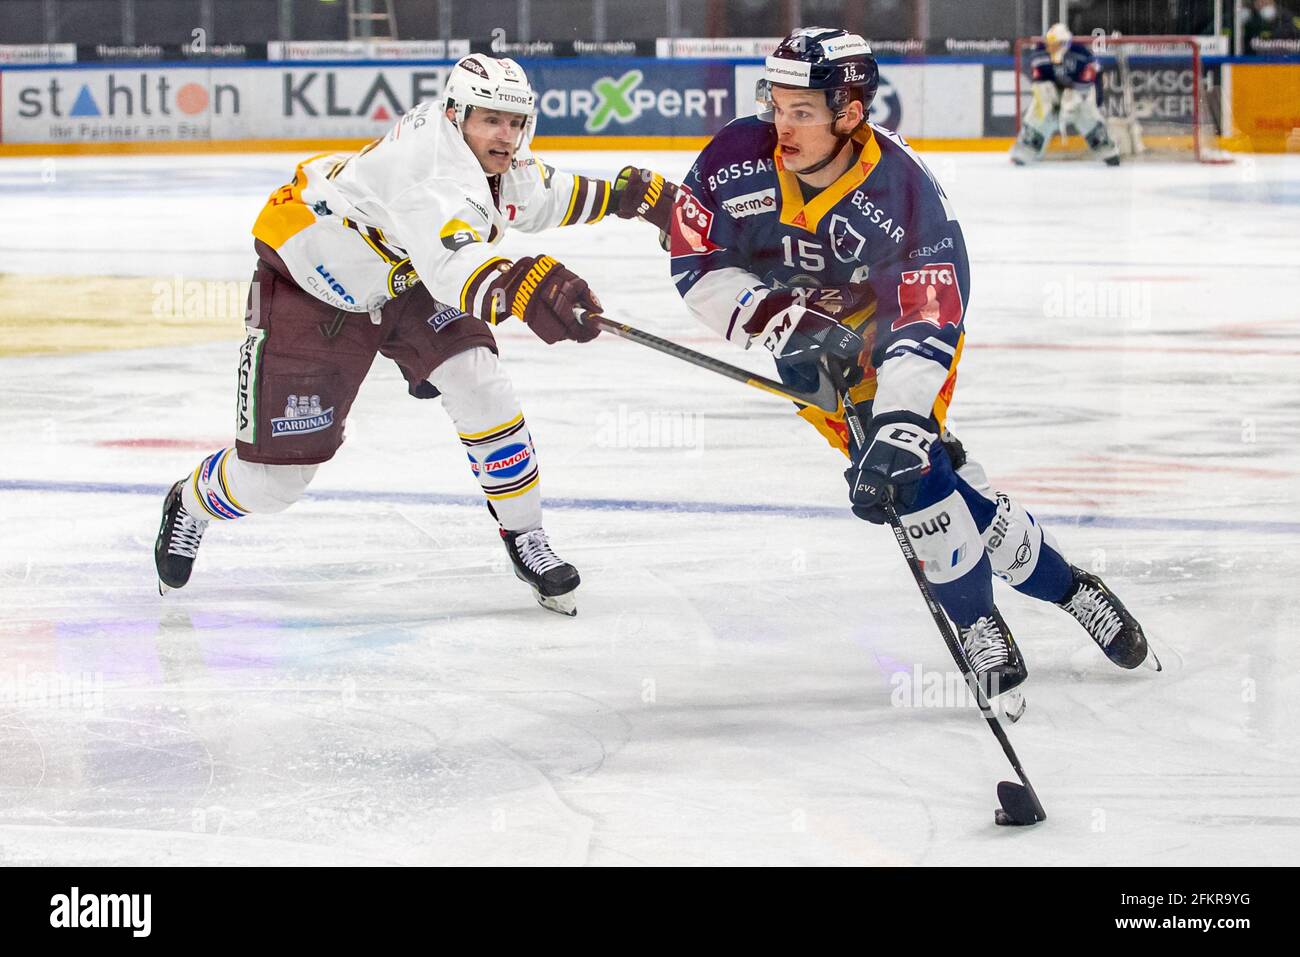 # 86 Joel Vermin (Geneva) arrives late against Gregory Hofmann # 15 (EV Zug) during the National League Playoff Final ice hockey game 1 between EV Zug and Geneve-Servette HC on May 3rd, 2021 in the Bossard Arena in Zug. (Switzerland/Croatia OUT) Credit: SPP Sport Press Photo. /Alamy Live News Stock Photo